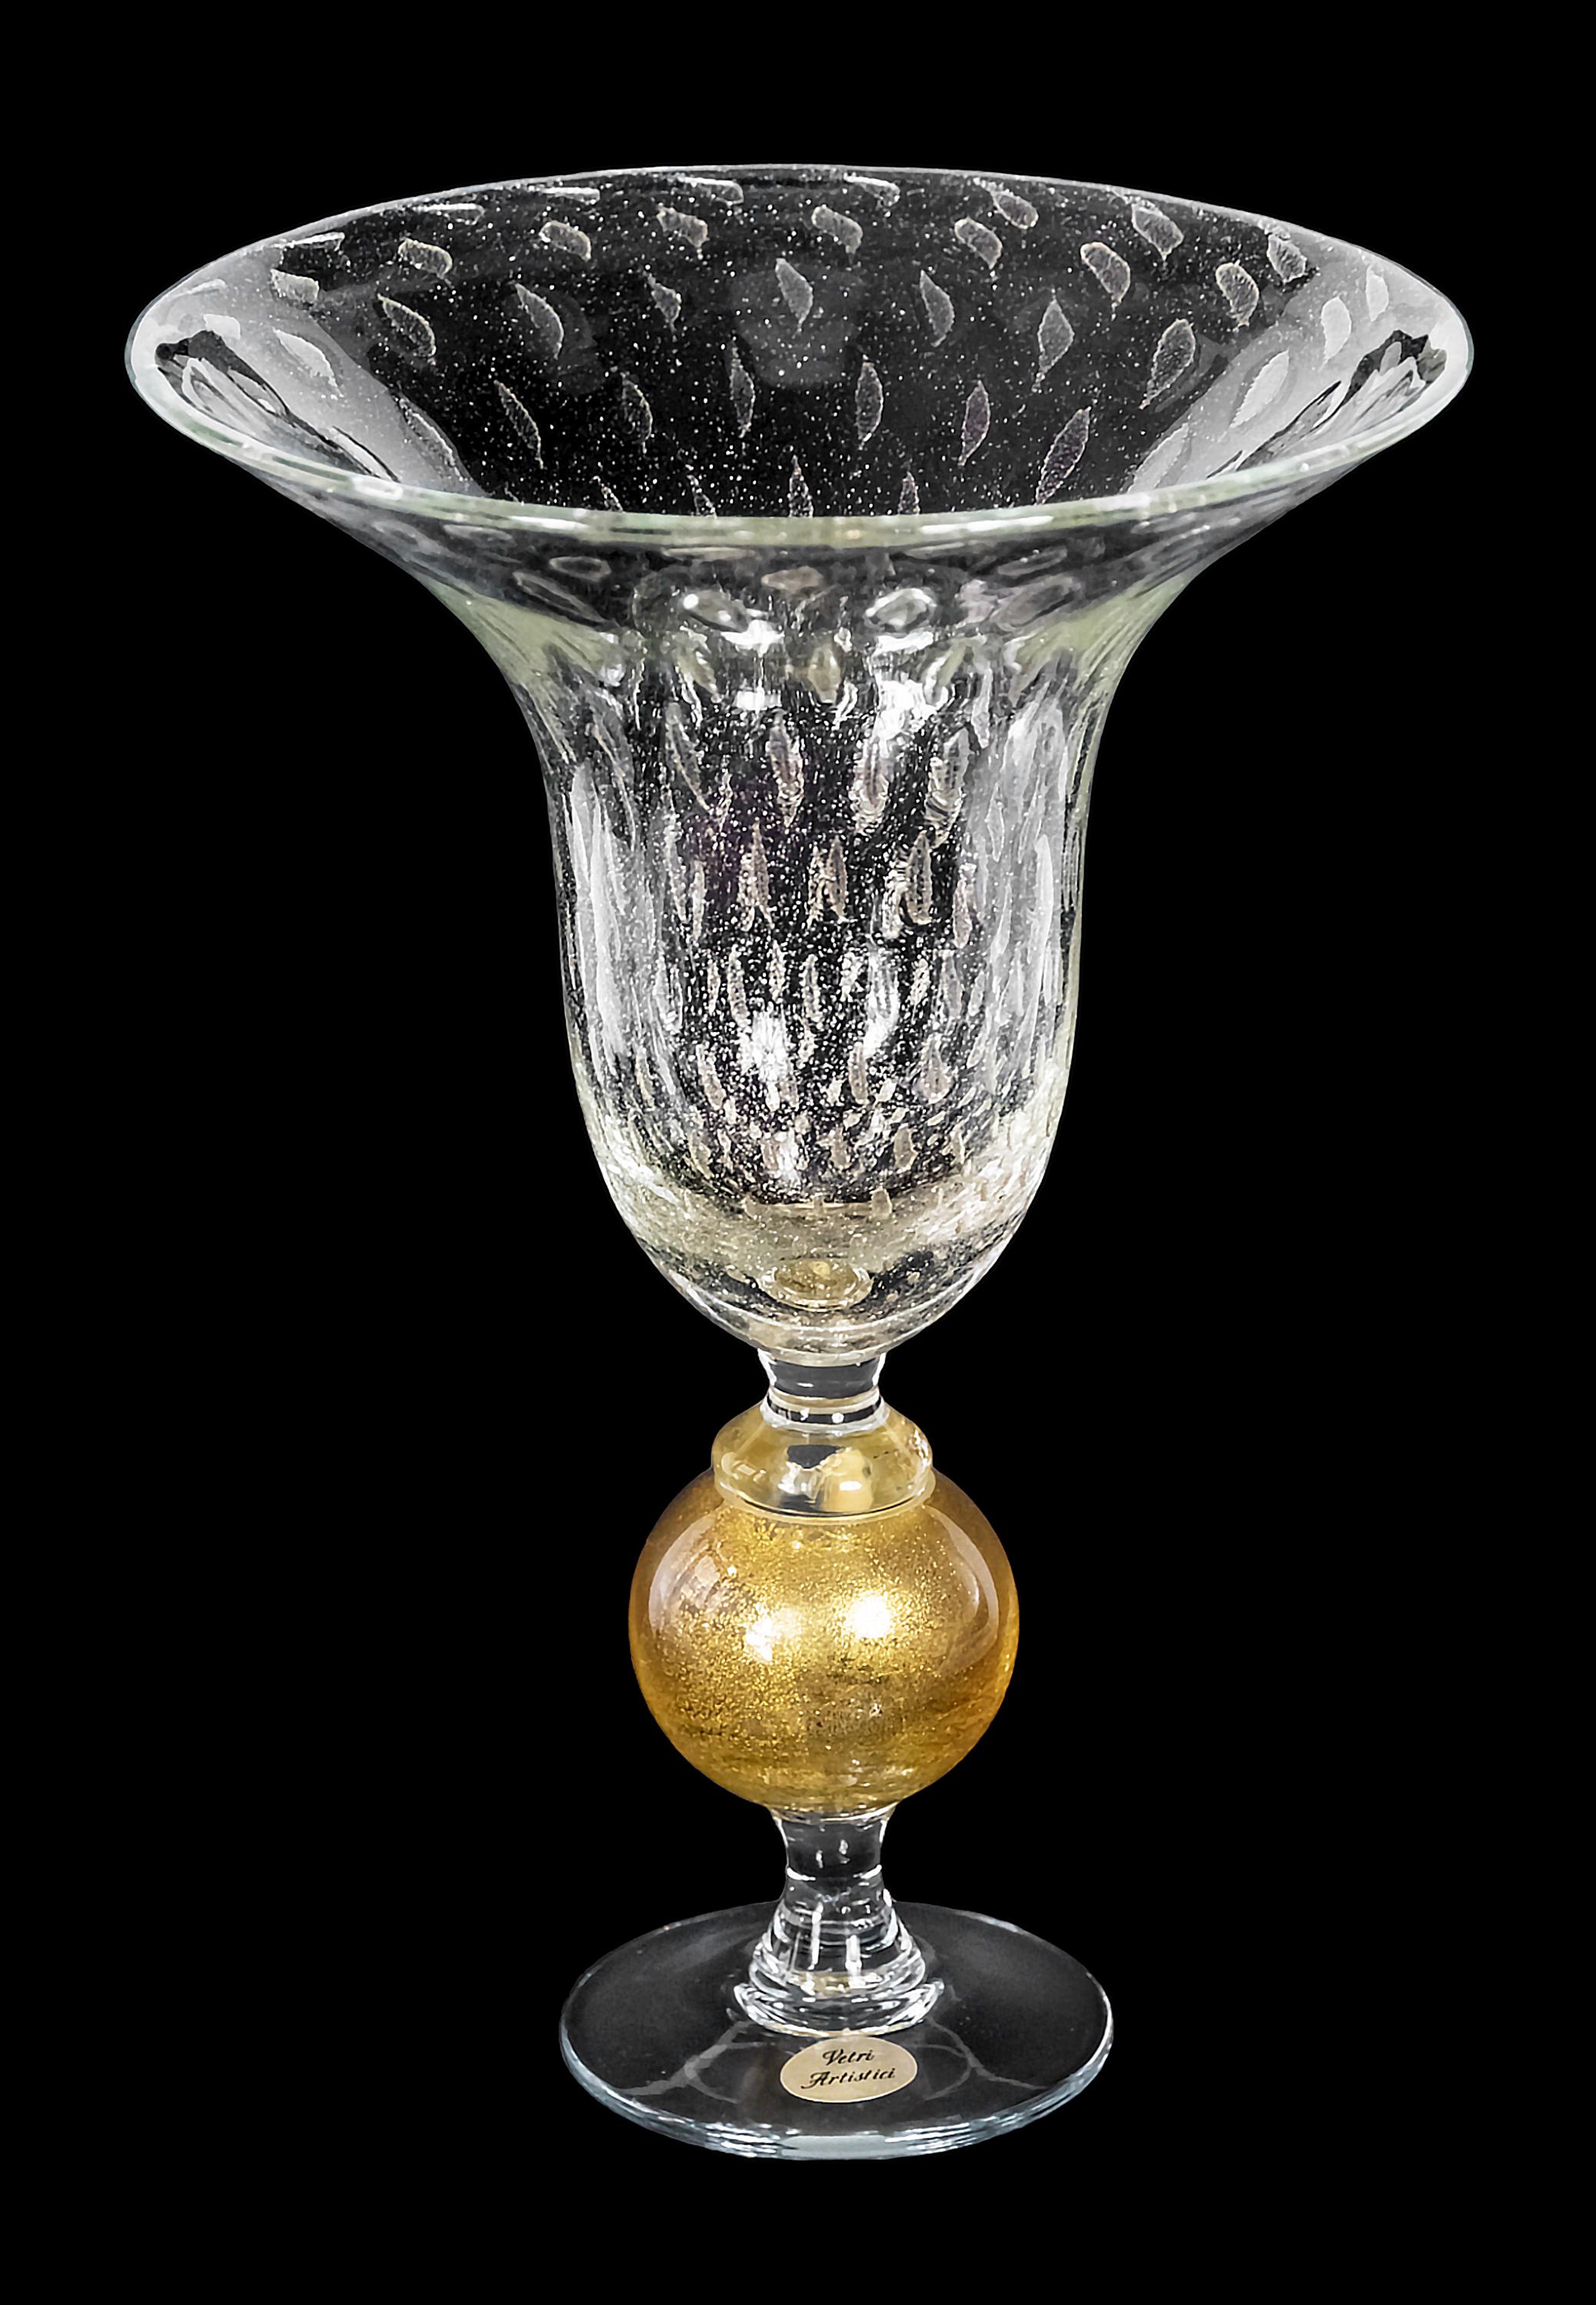 Italian handmade Murano glass vase created by glass master Marino Santi and signed in engraving on the base. 
Murano glass with inside air bubbles and inlaid gold dust. 
The base is in clear glass with a sphere shape detail decorated with inlaid